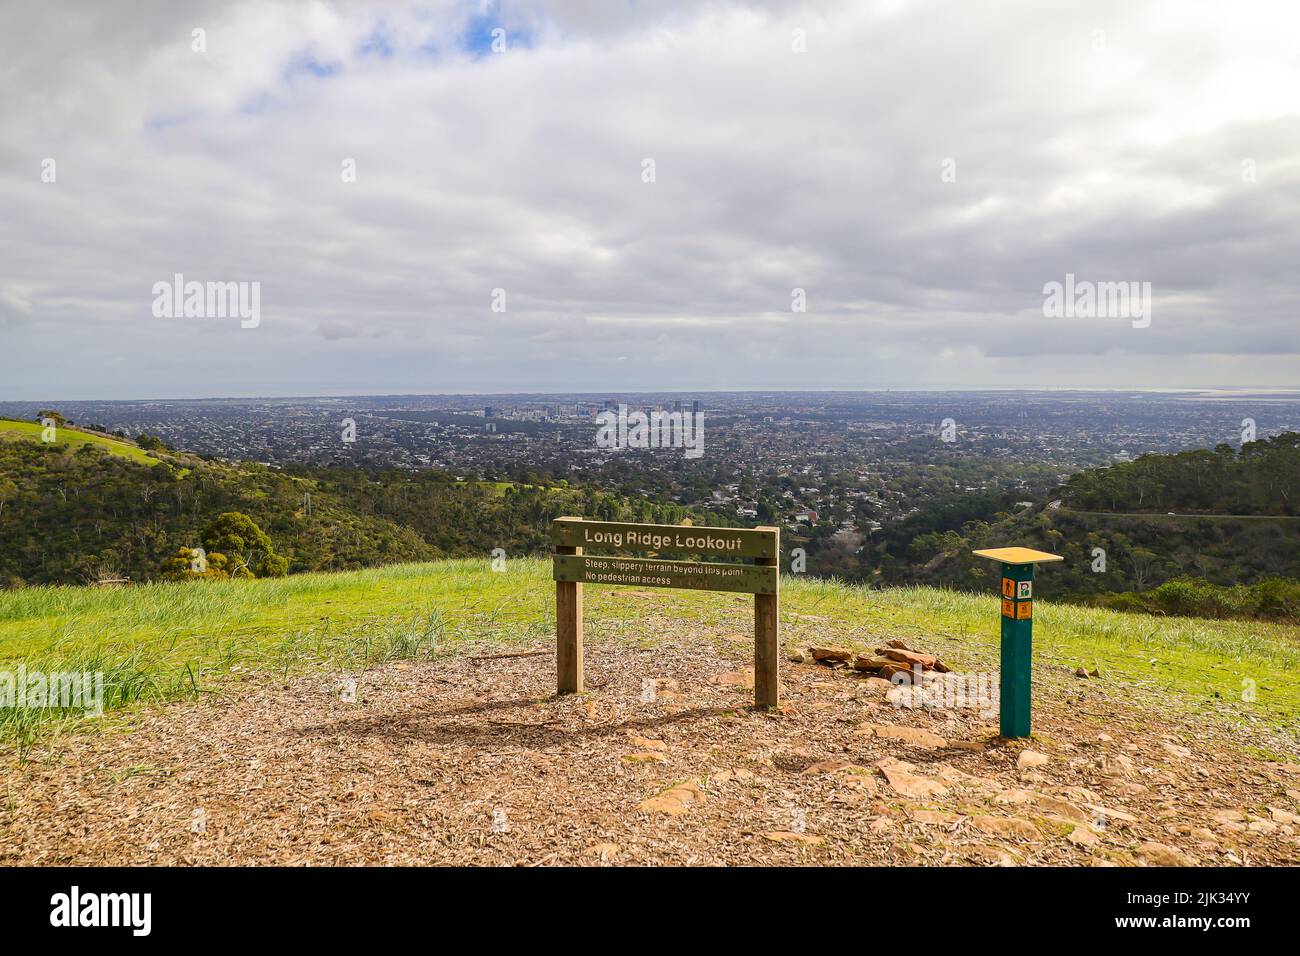 Amazing view of the city of Adelaide from Long Ridge Lookout Point in Cleland National Park in South Australia Stock Photo